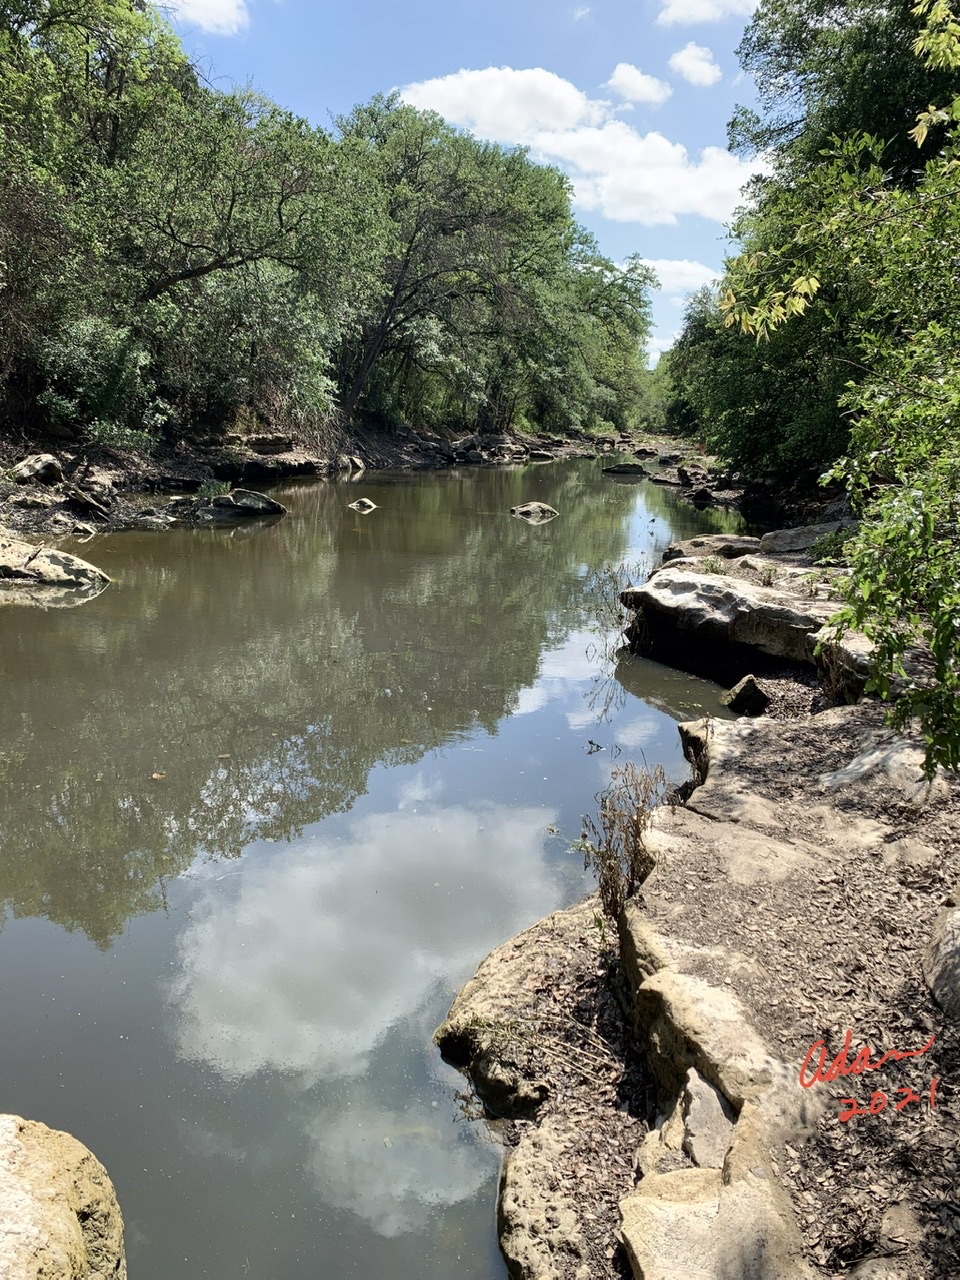 May 12, 2021 – Random (sorta) Pic of the Day, A Little Water in Barton Creek